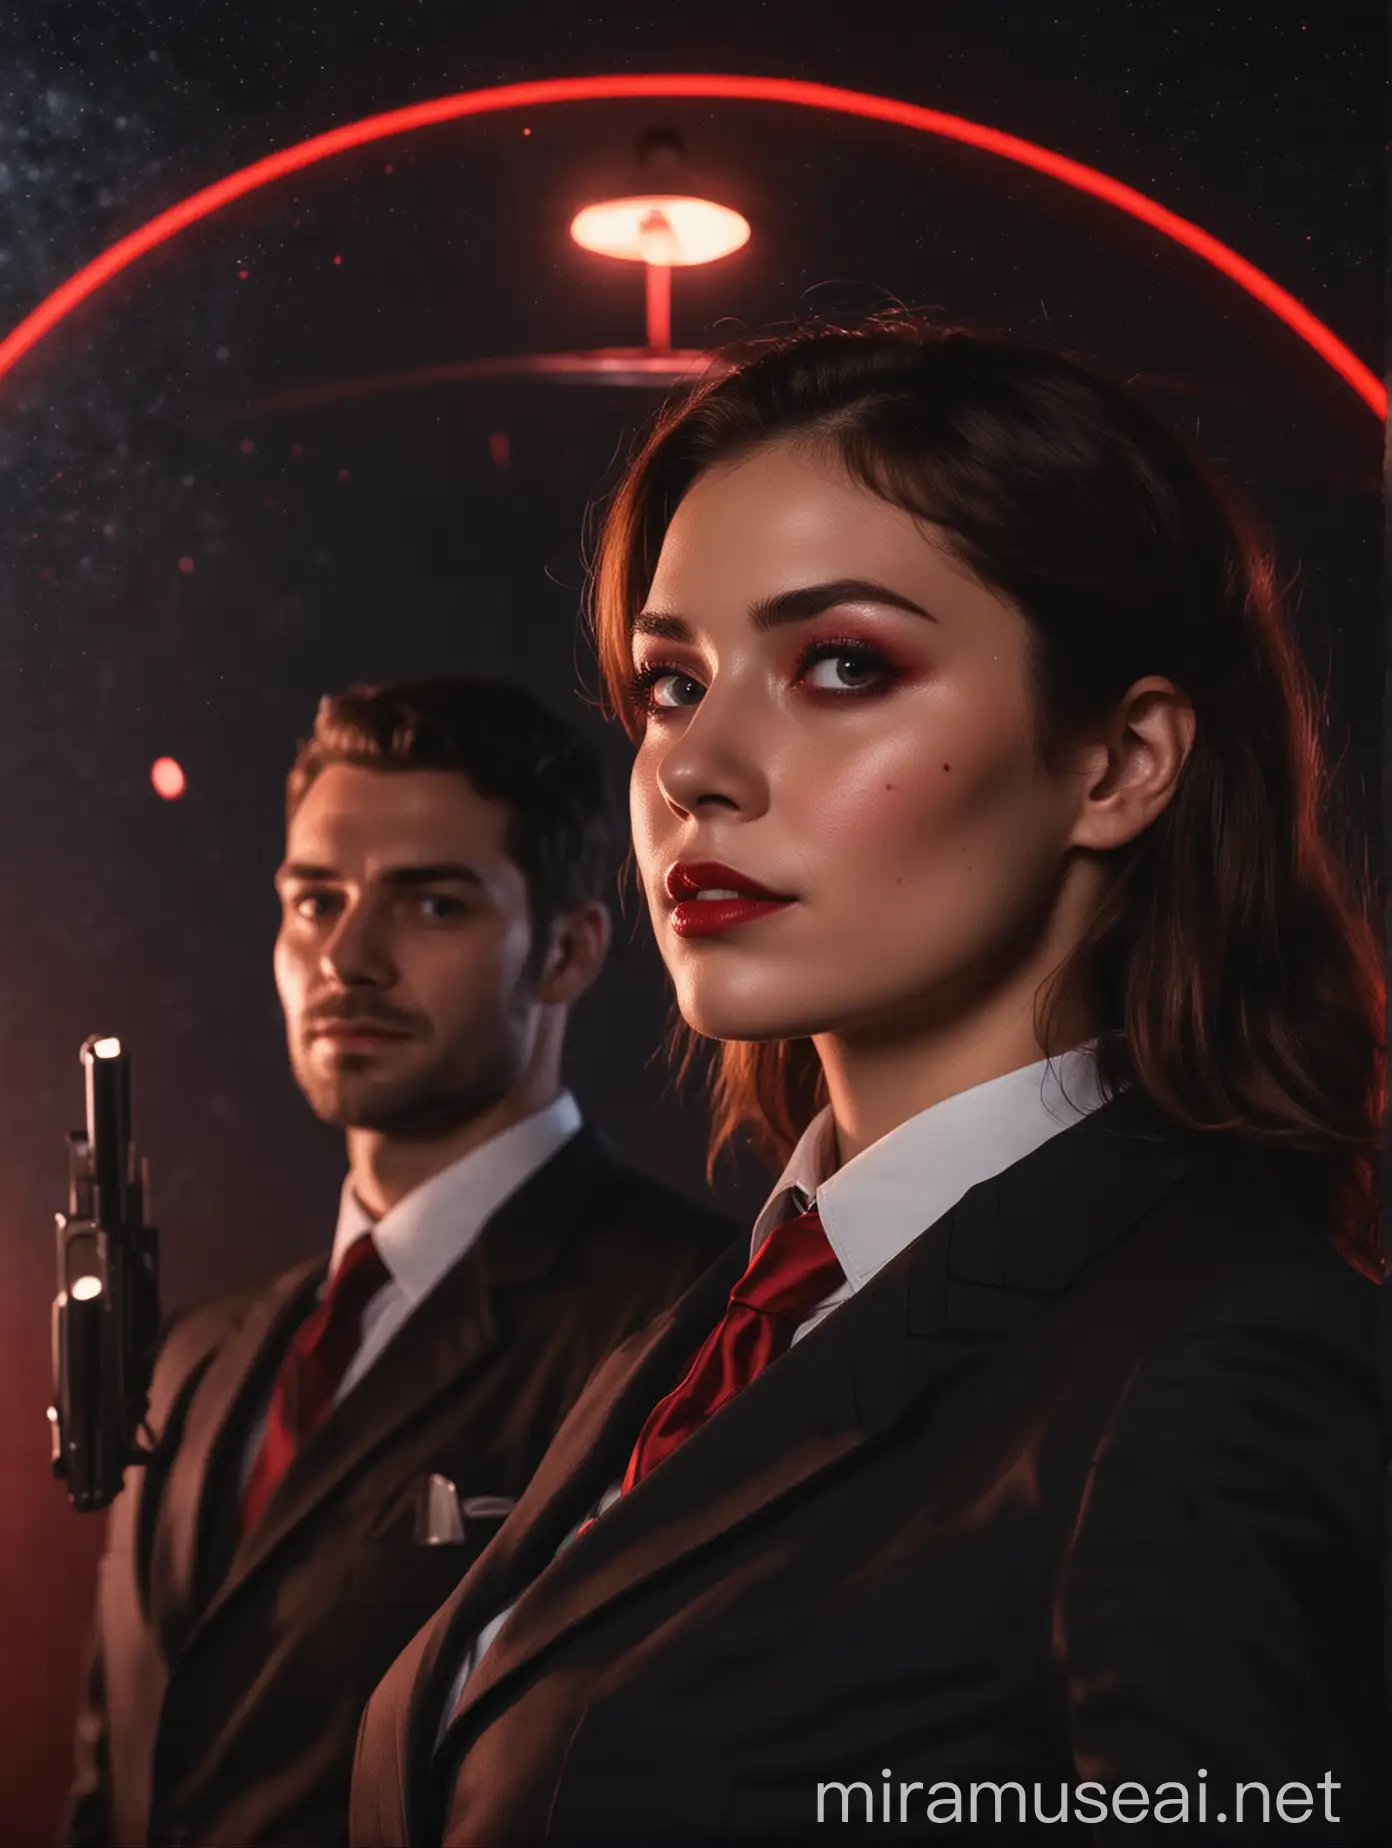 A beautiful woman in a detective suit, staring at the night sky, with a man in suit smirking from behind, and a red black luminous light with gun shadow right behind them